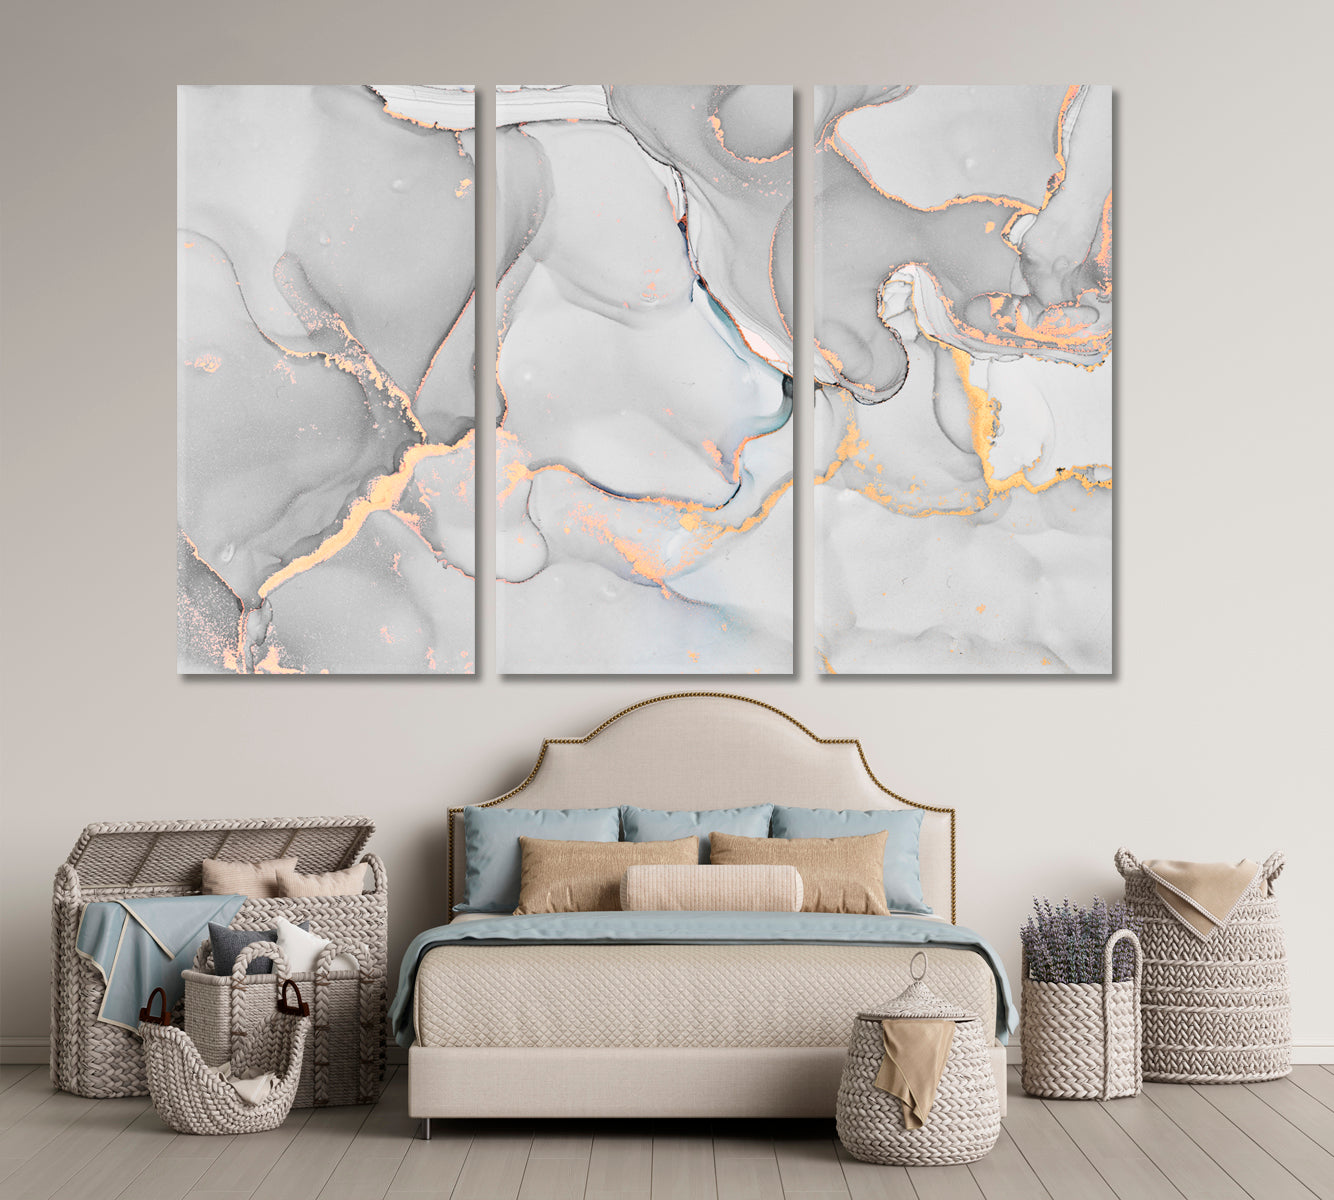 MARBLE Tender Gray White Transparent Waves Abstract Fluid Painting Fluid Art, Oriental Marbling Canvas Print Artesty 3 panels 36" x 24" 